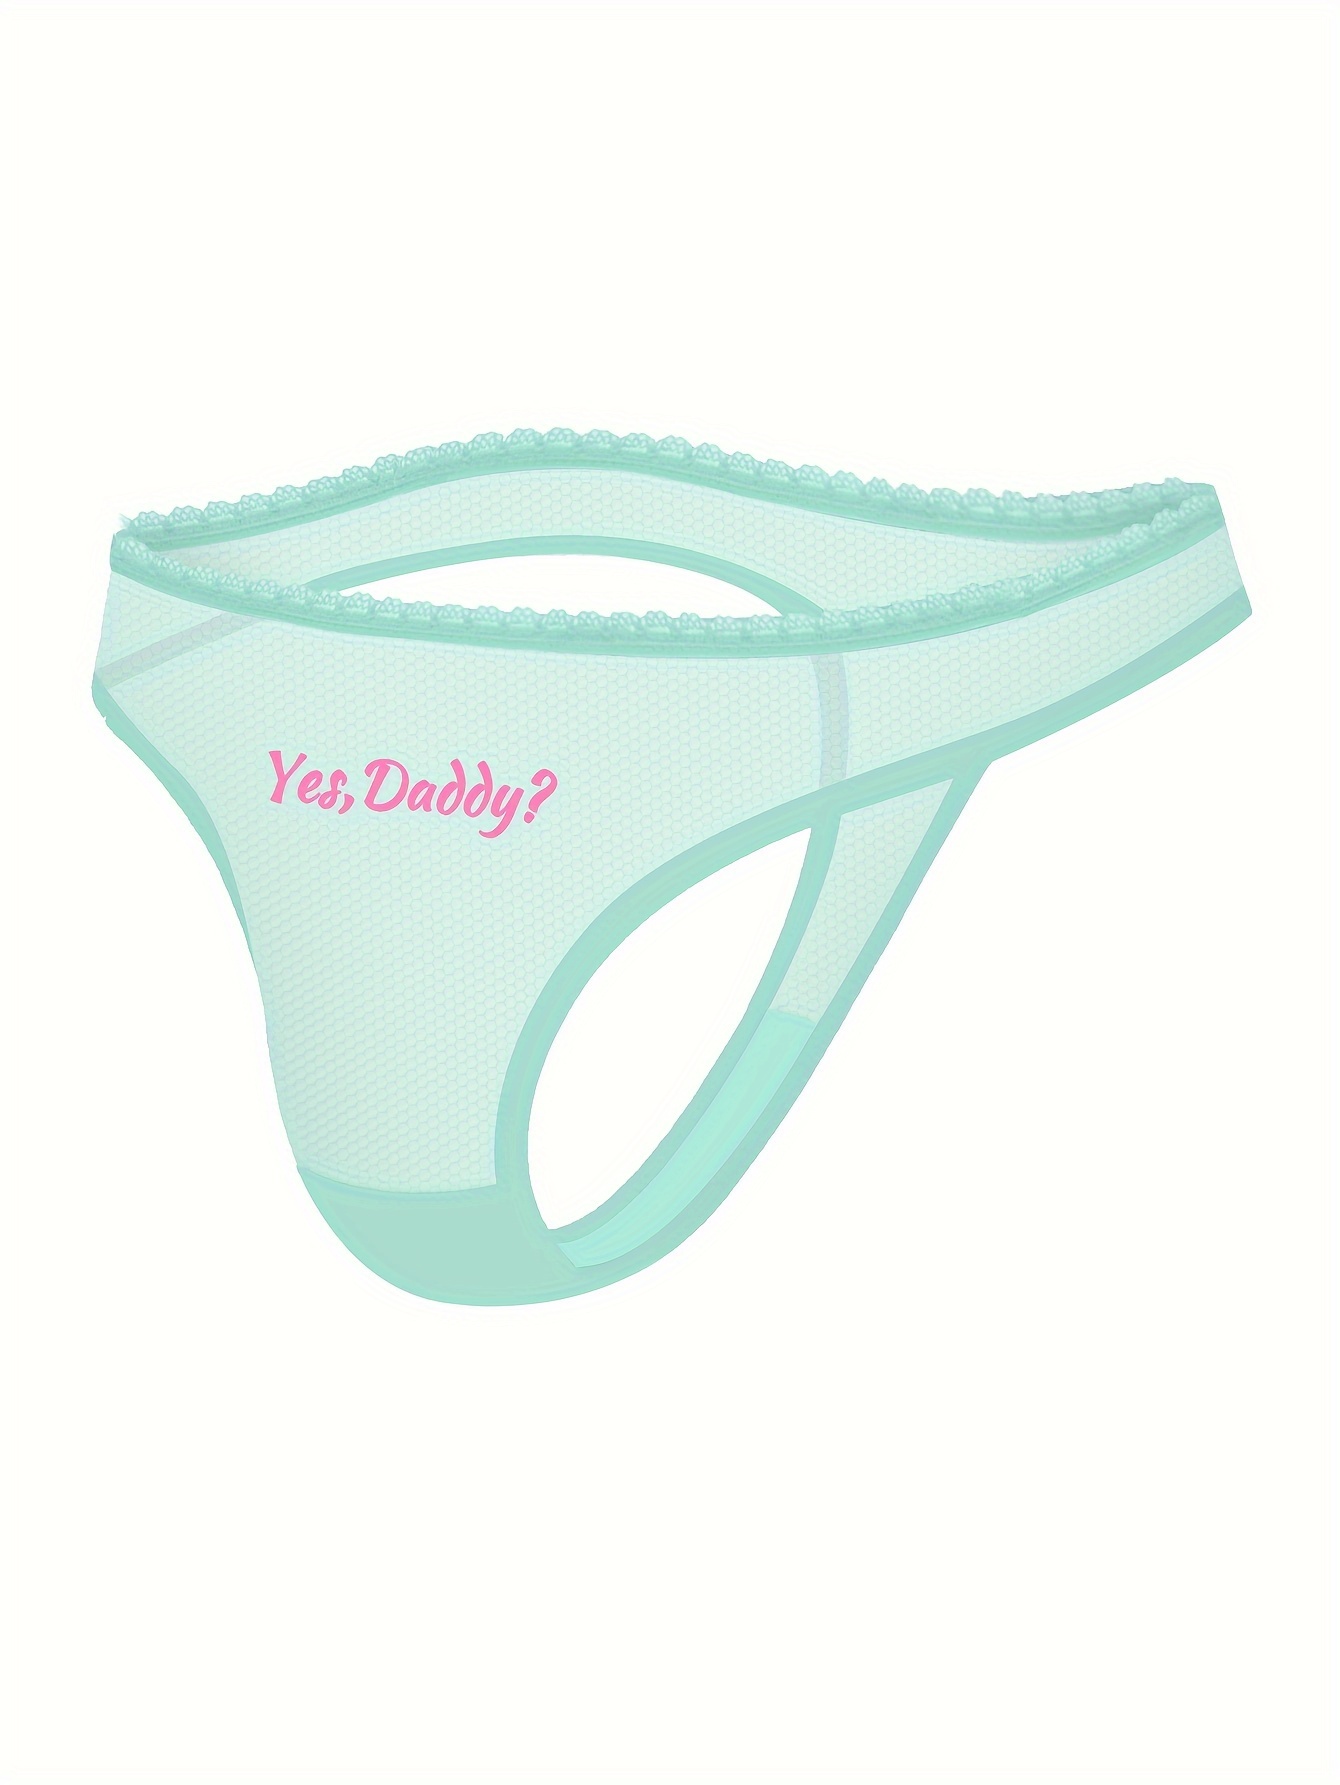 Yes Daddy Sexy Panties For Her